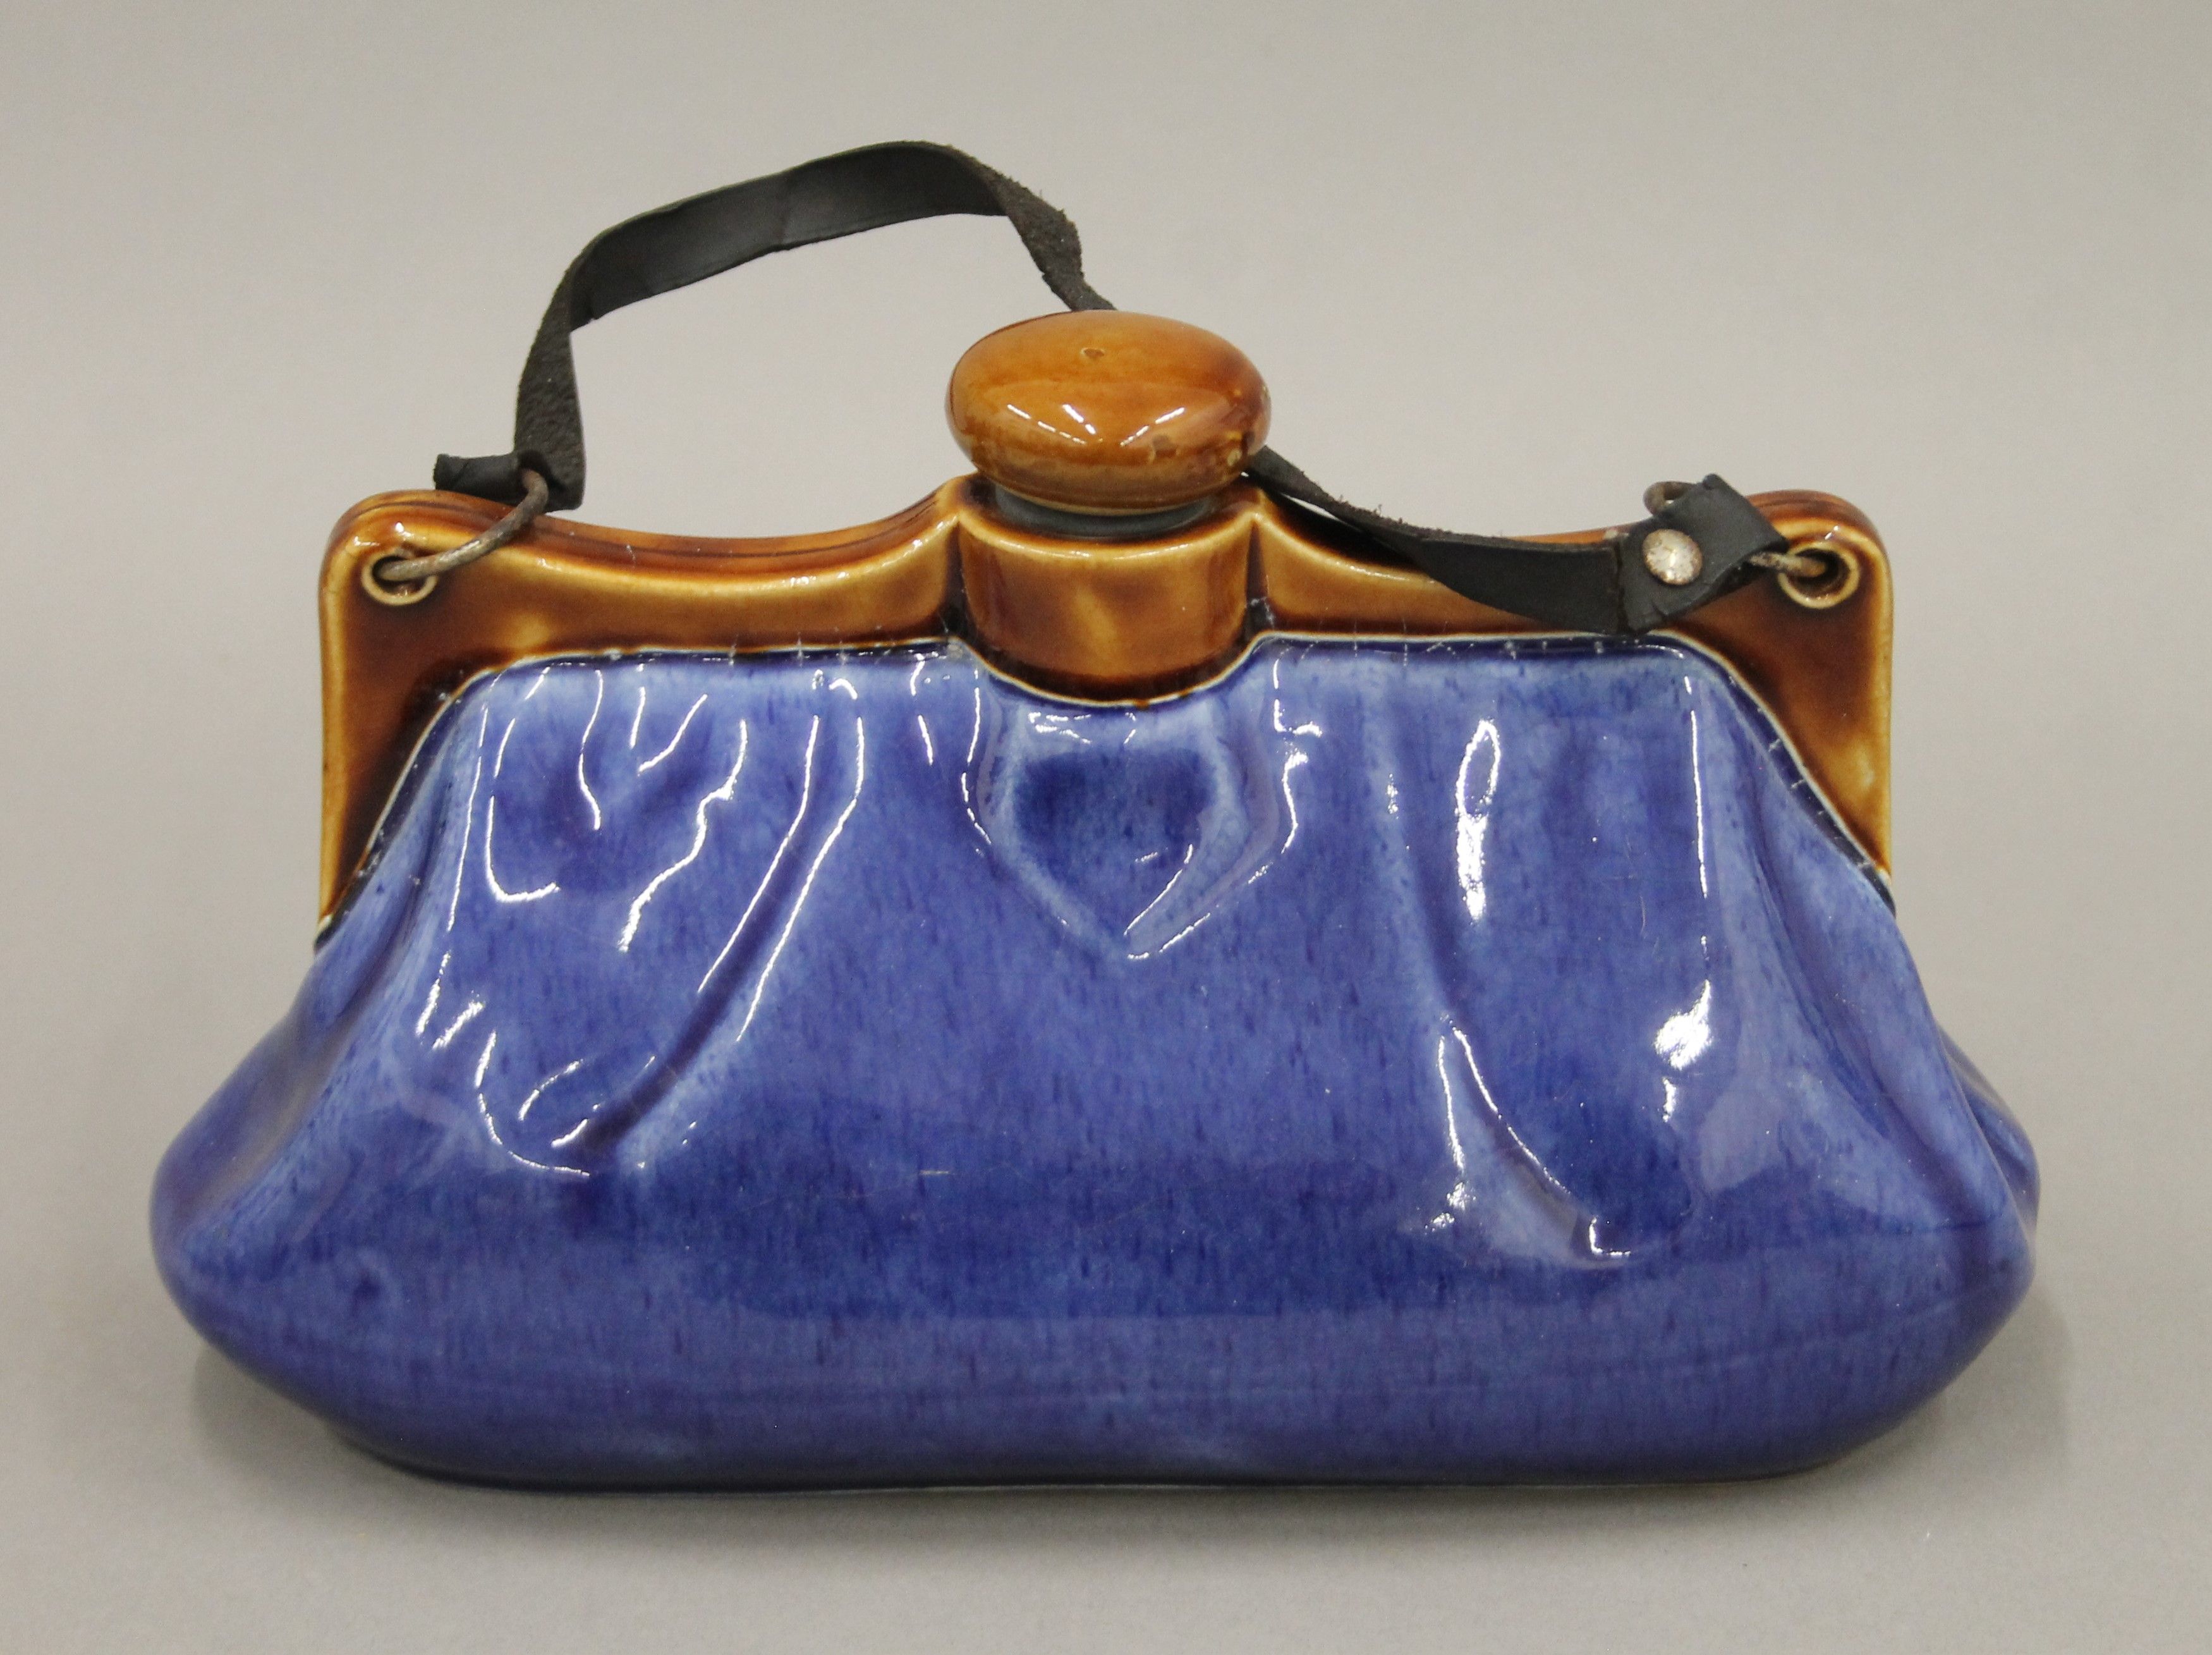 A Bourne Denby stoneware hot water bottle in the form of a ladies handbag. 25 cm long.